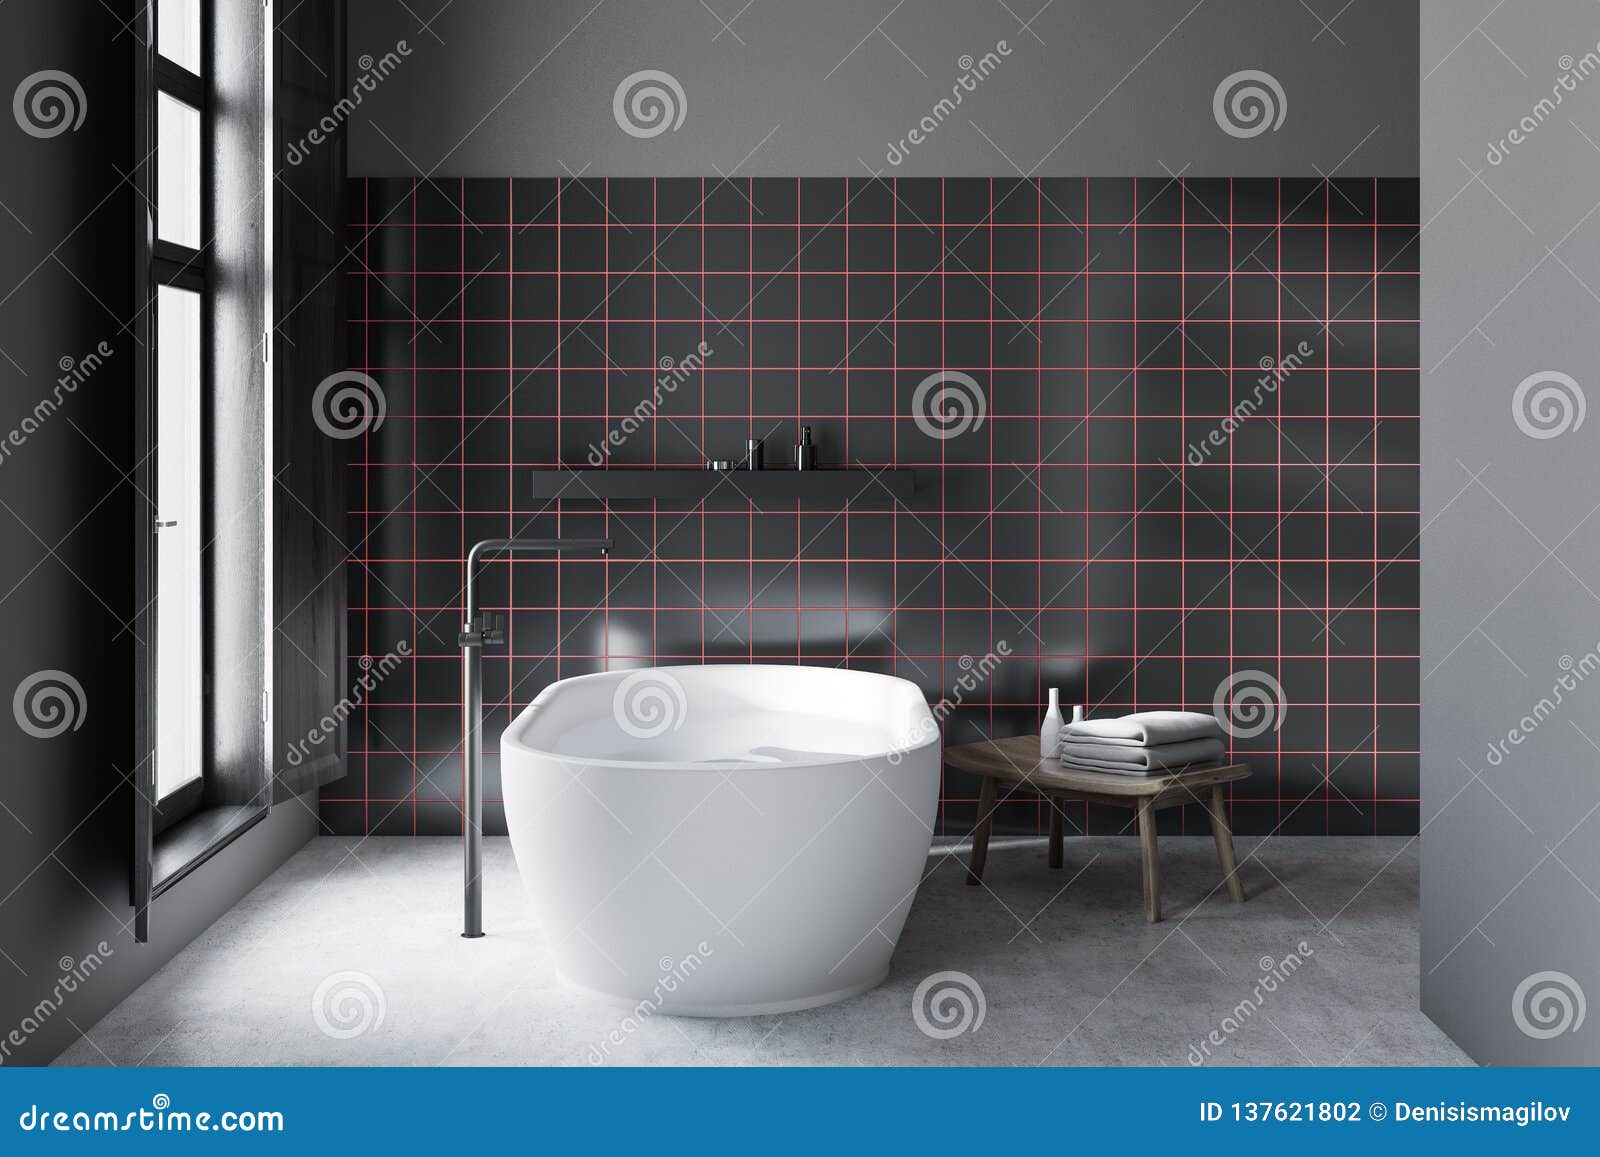 Black Tiled Bathroom with Tub, Side View Stock Illustration ...